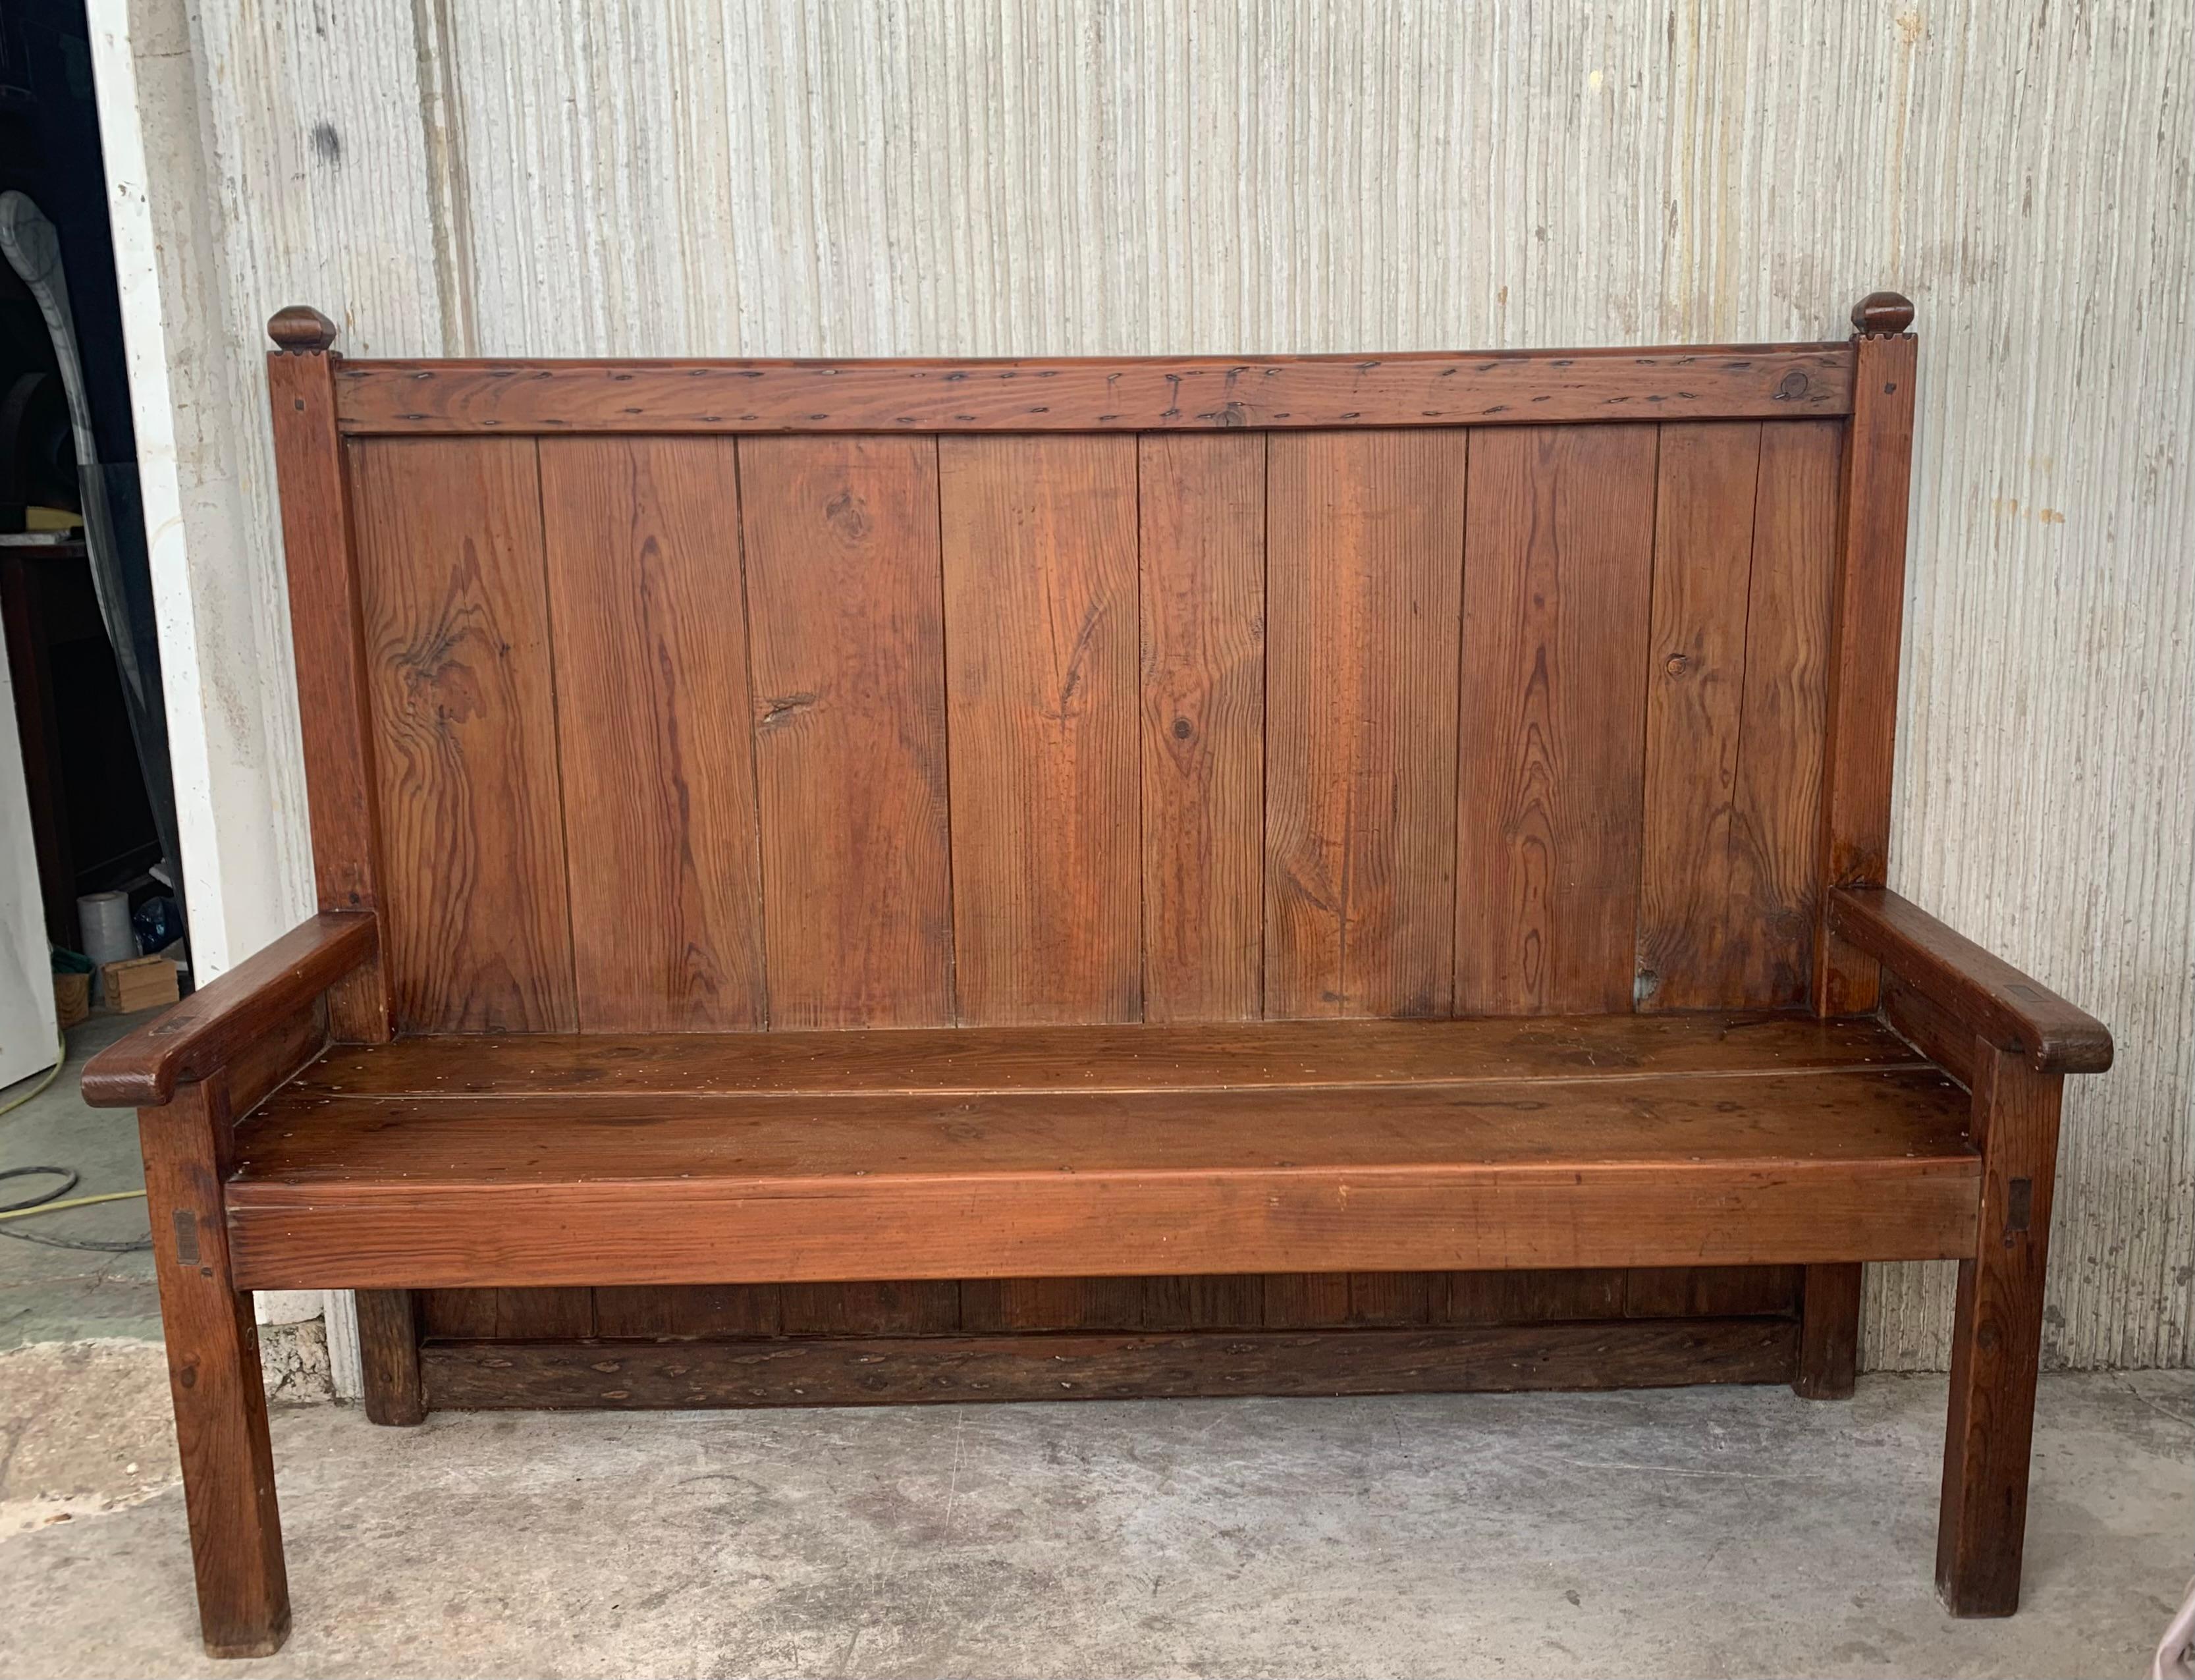 This is a Spanish, pine, bench with honey patina. It is dove tailed and a sturdy, rustic piece that would be idea as a hall bench or many other uses in your home or covered patio.

Height to the arms: 22.83in.